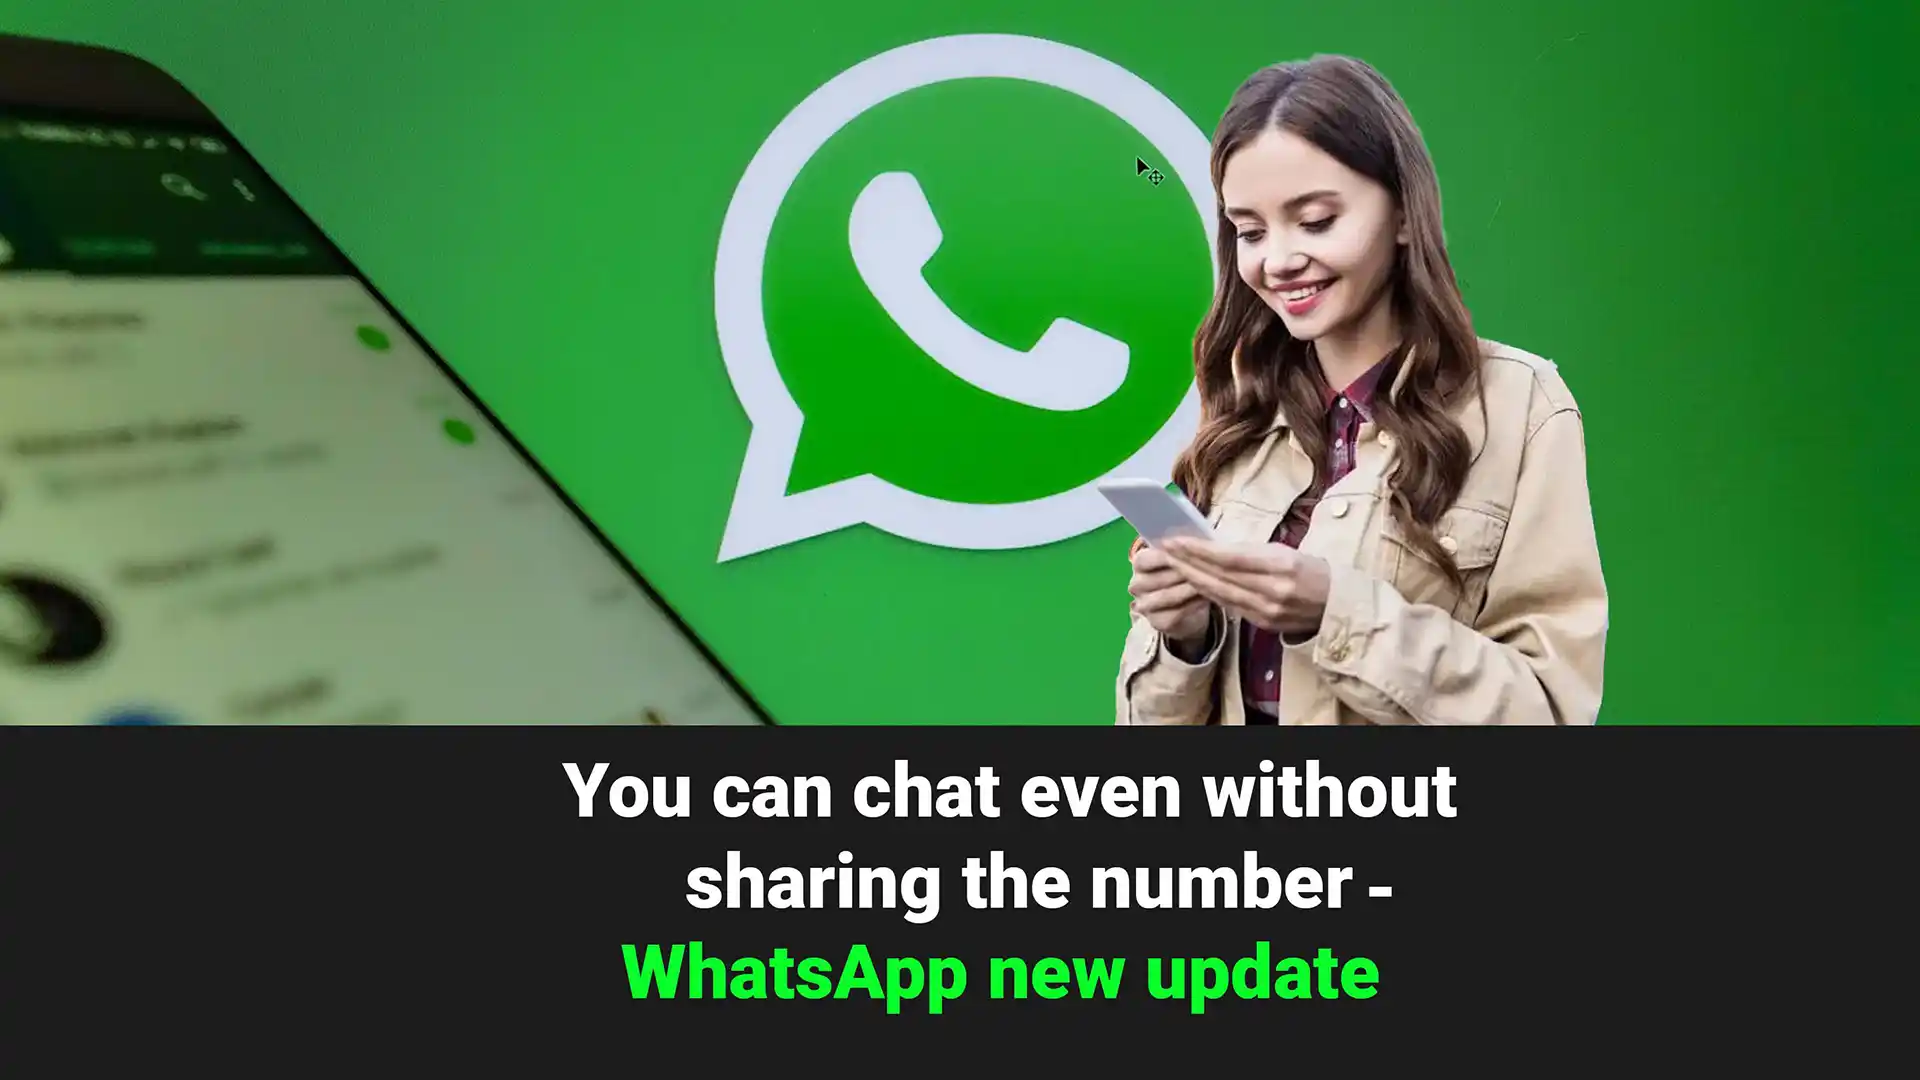 chat even without sharing the number - WhatsApp new update